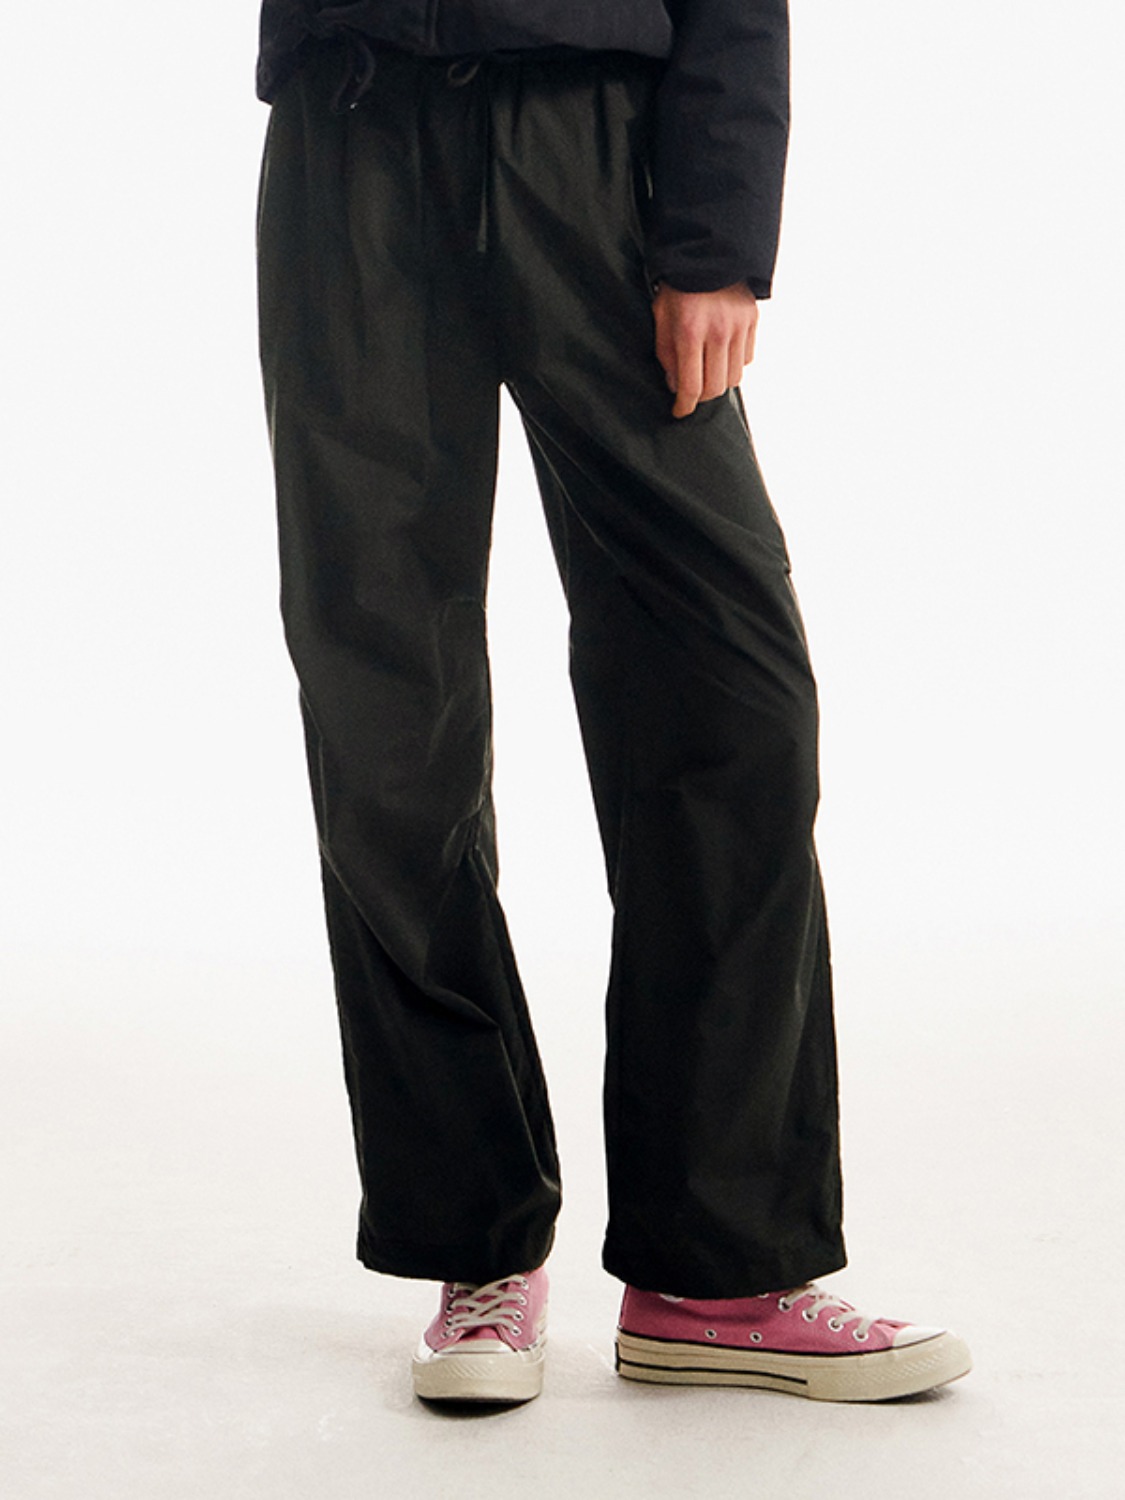 DOODLE CHERRY WIDE WOVEN PANTS [GRAY CHARCOAL]